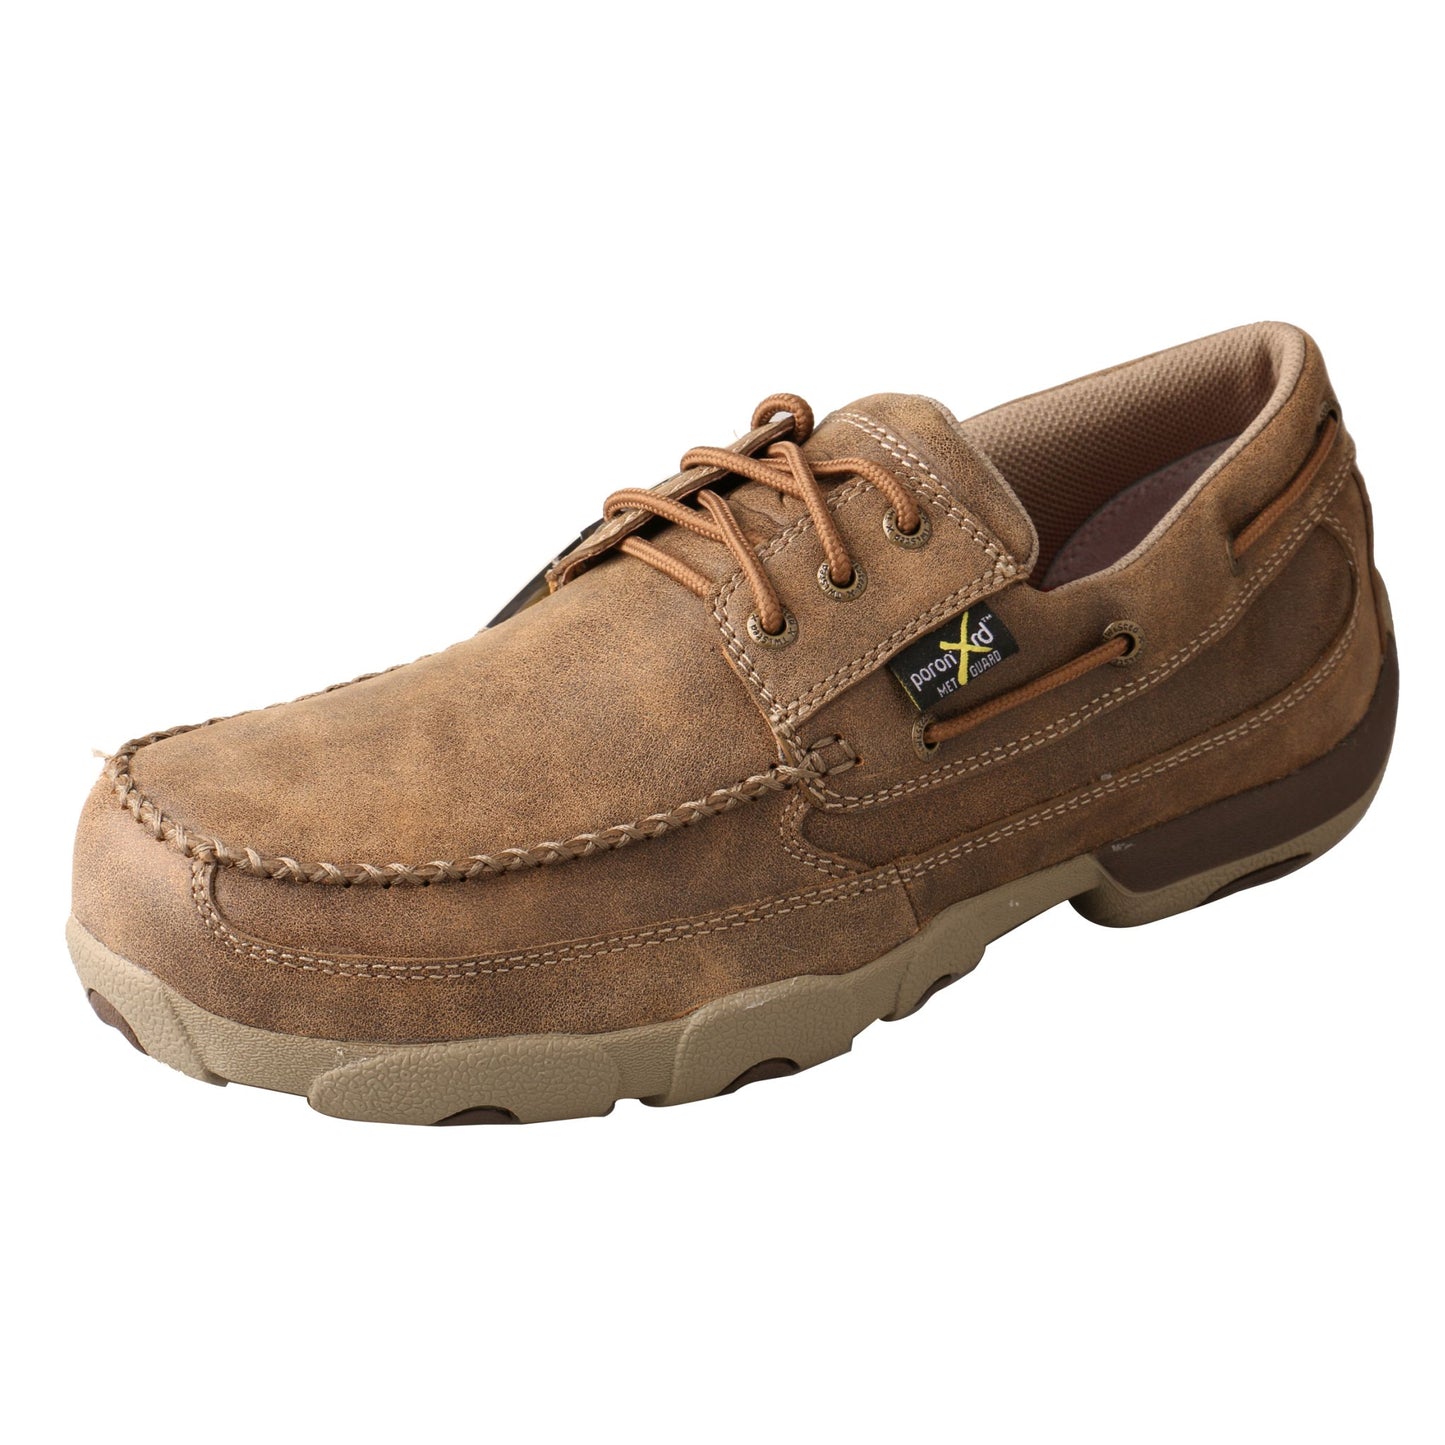 Picture of front outside of Men's Twisted X Safety Toe Work Boat Shoe Driving Moc MDMSTM1